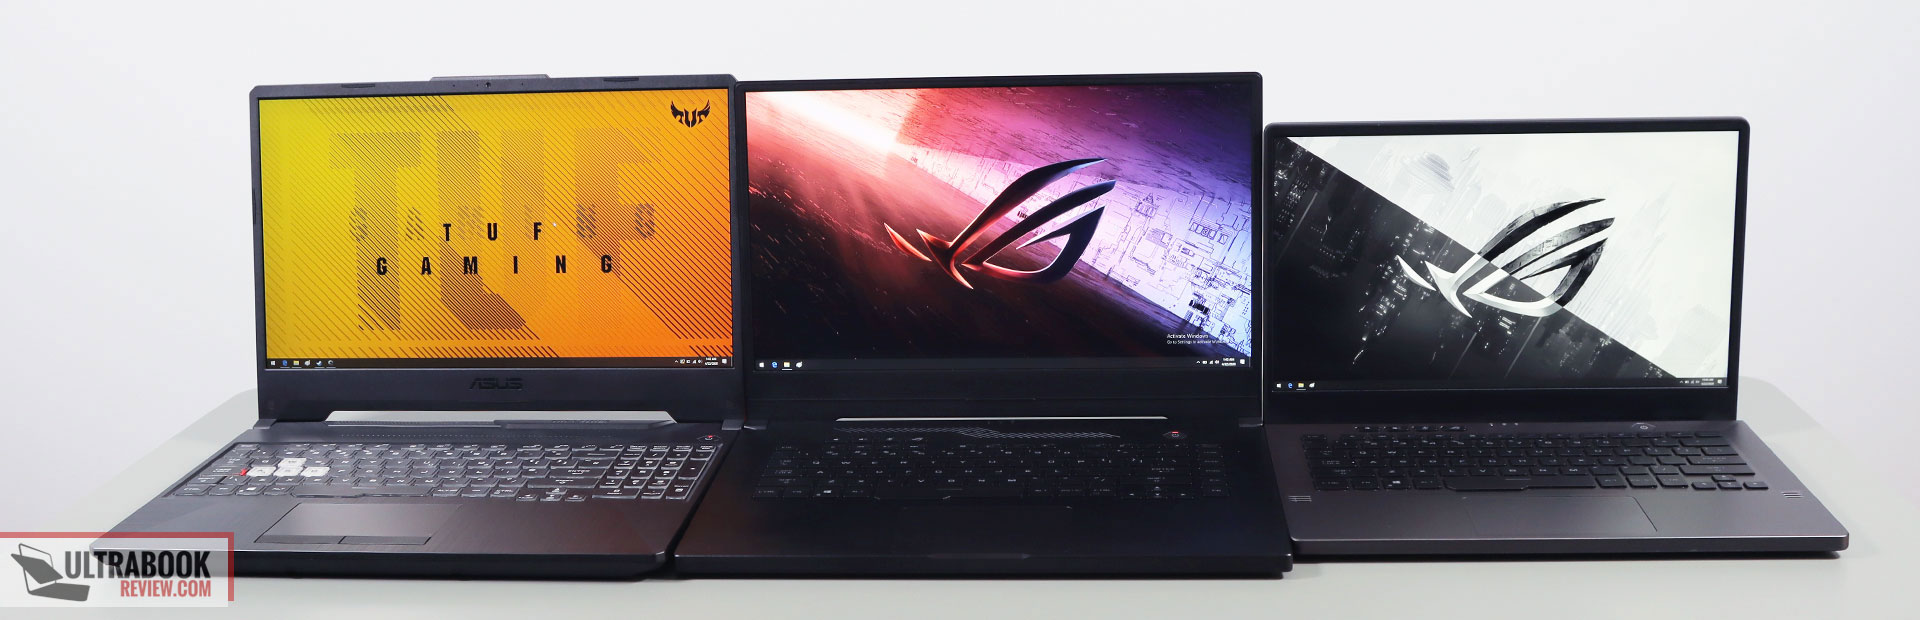 Asus TUF A15 (left), Zephyrus G15 (middle) and Zephryus G14 (right)